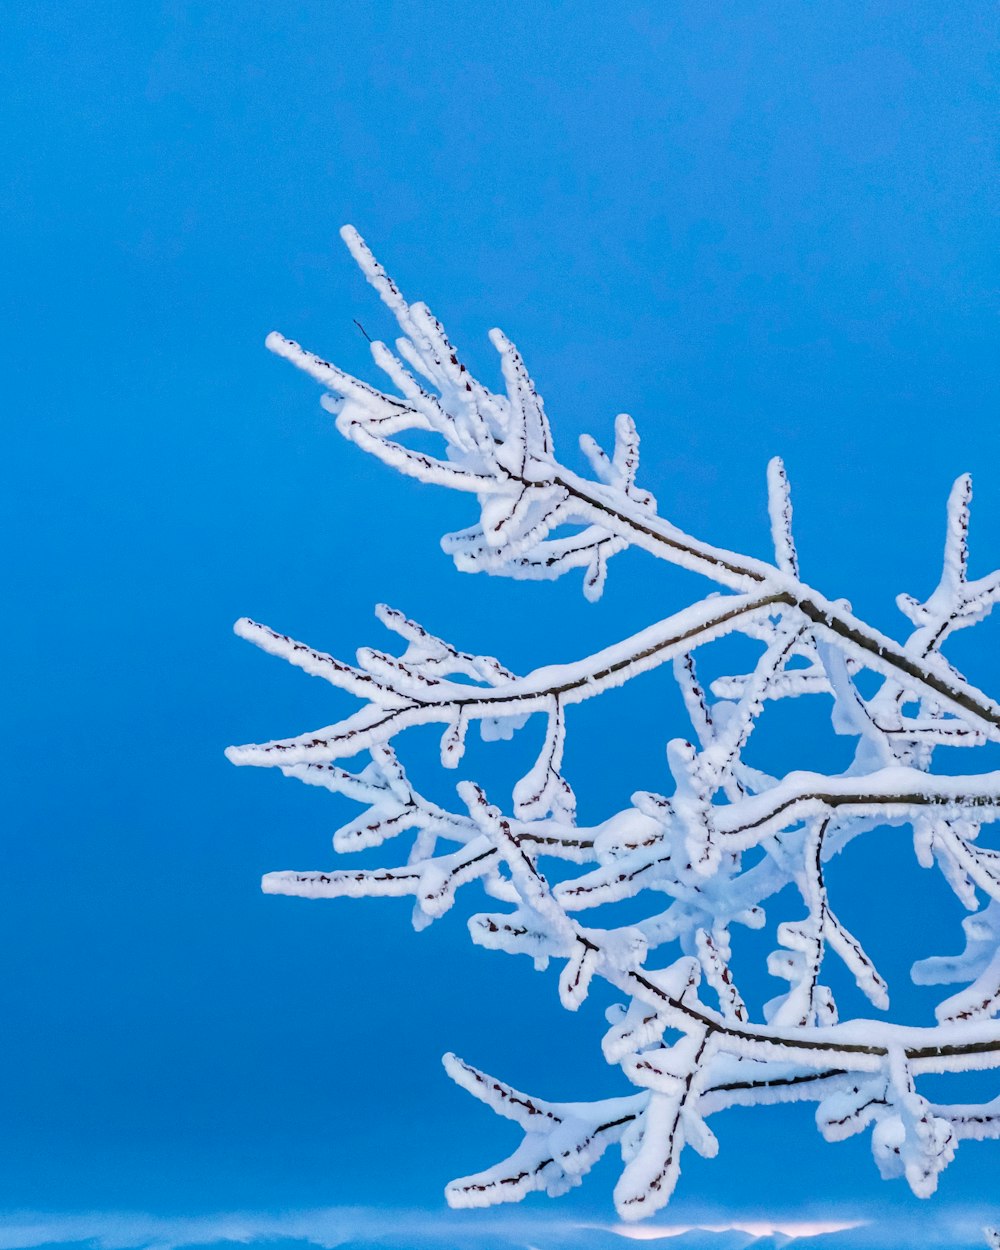 a snow covered tree branch against a blue sky